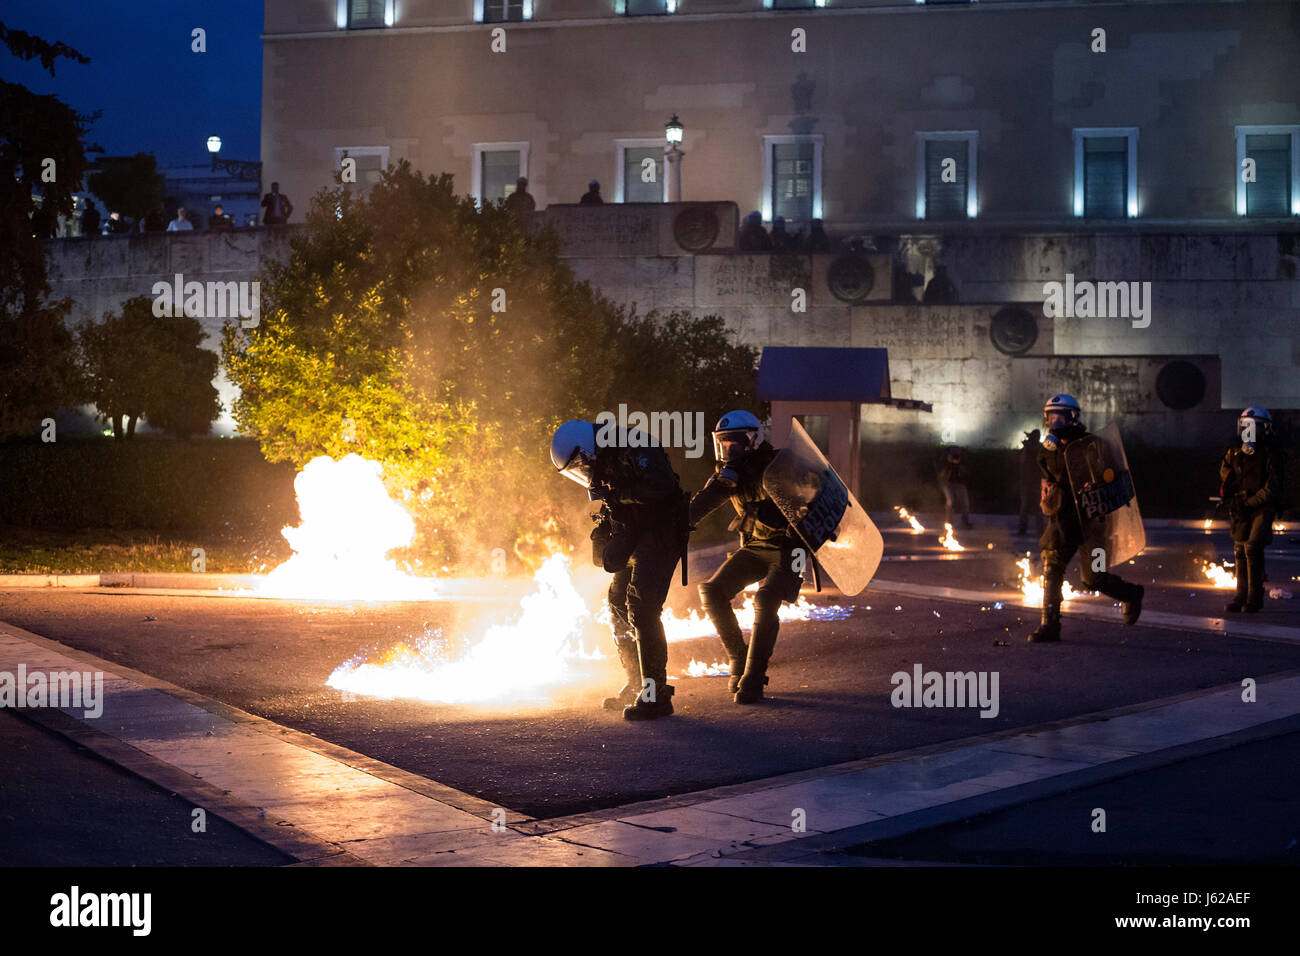 A policeman's uniform catches fire during a demonstration against new austerity measures in front of the Greek Parliament in Athens, Greece, 18 May 2017. During said demonstration police officers were attacked with molotov cocktails. The Greek Parliament is supposed to pass a new austerity package. Labour unions have called extensive strikes against the austerity measures. Photo: Socrates Baltagiannis/dpa Stock Photo